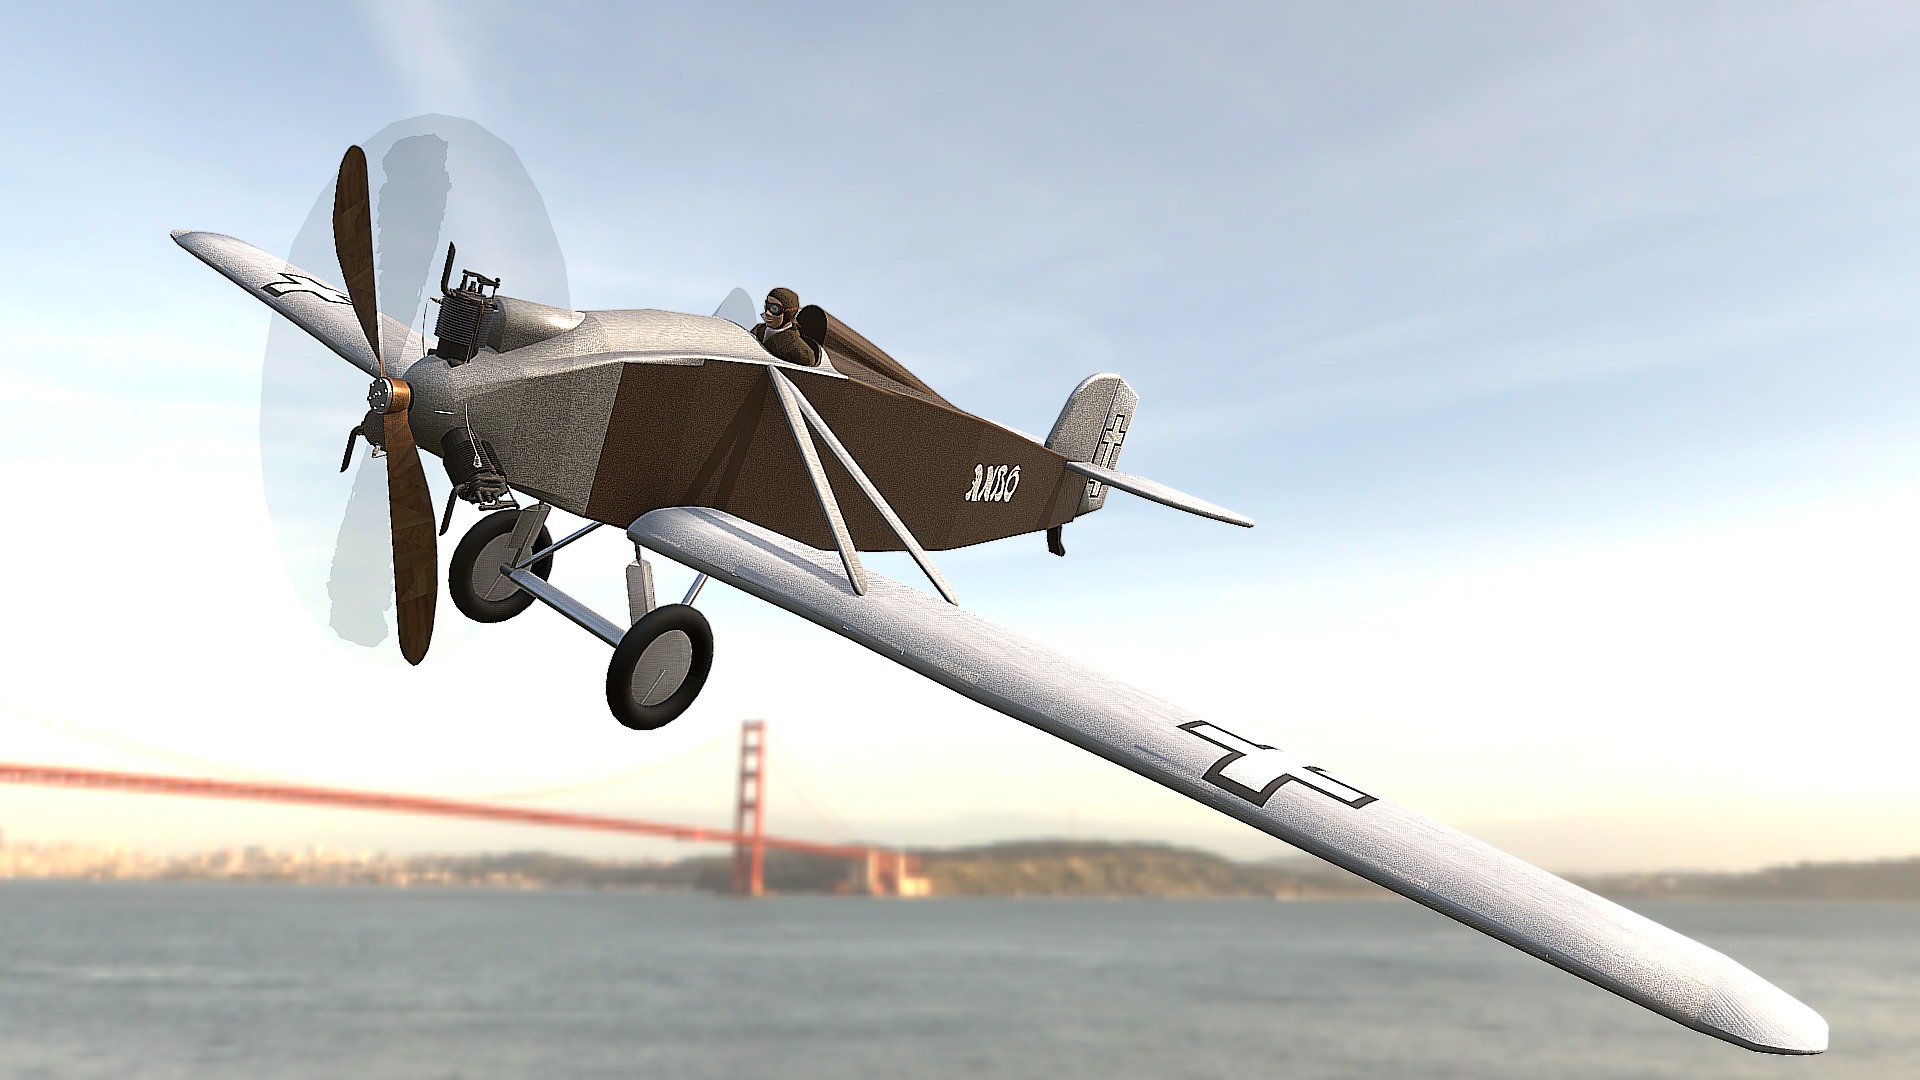 3D model Anbo 1  3D - This is a 3D model of the Anbo 1  3D. The 3D model is about a plane flying over water.